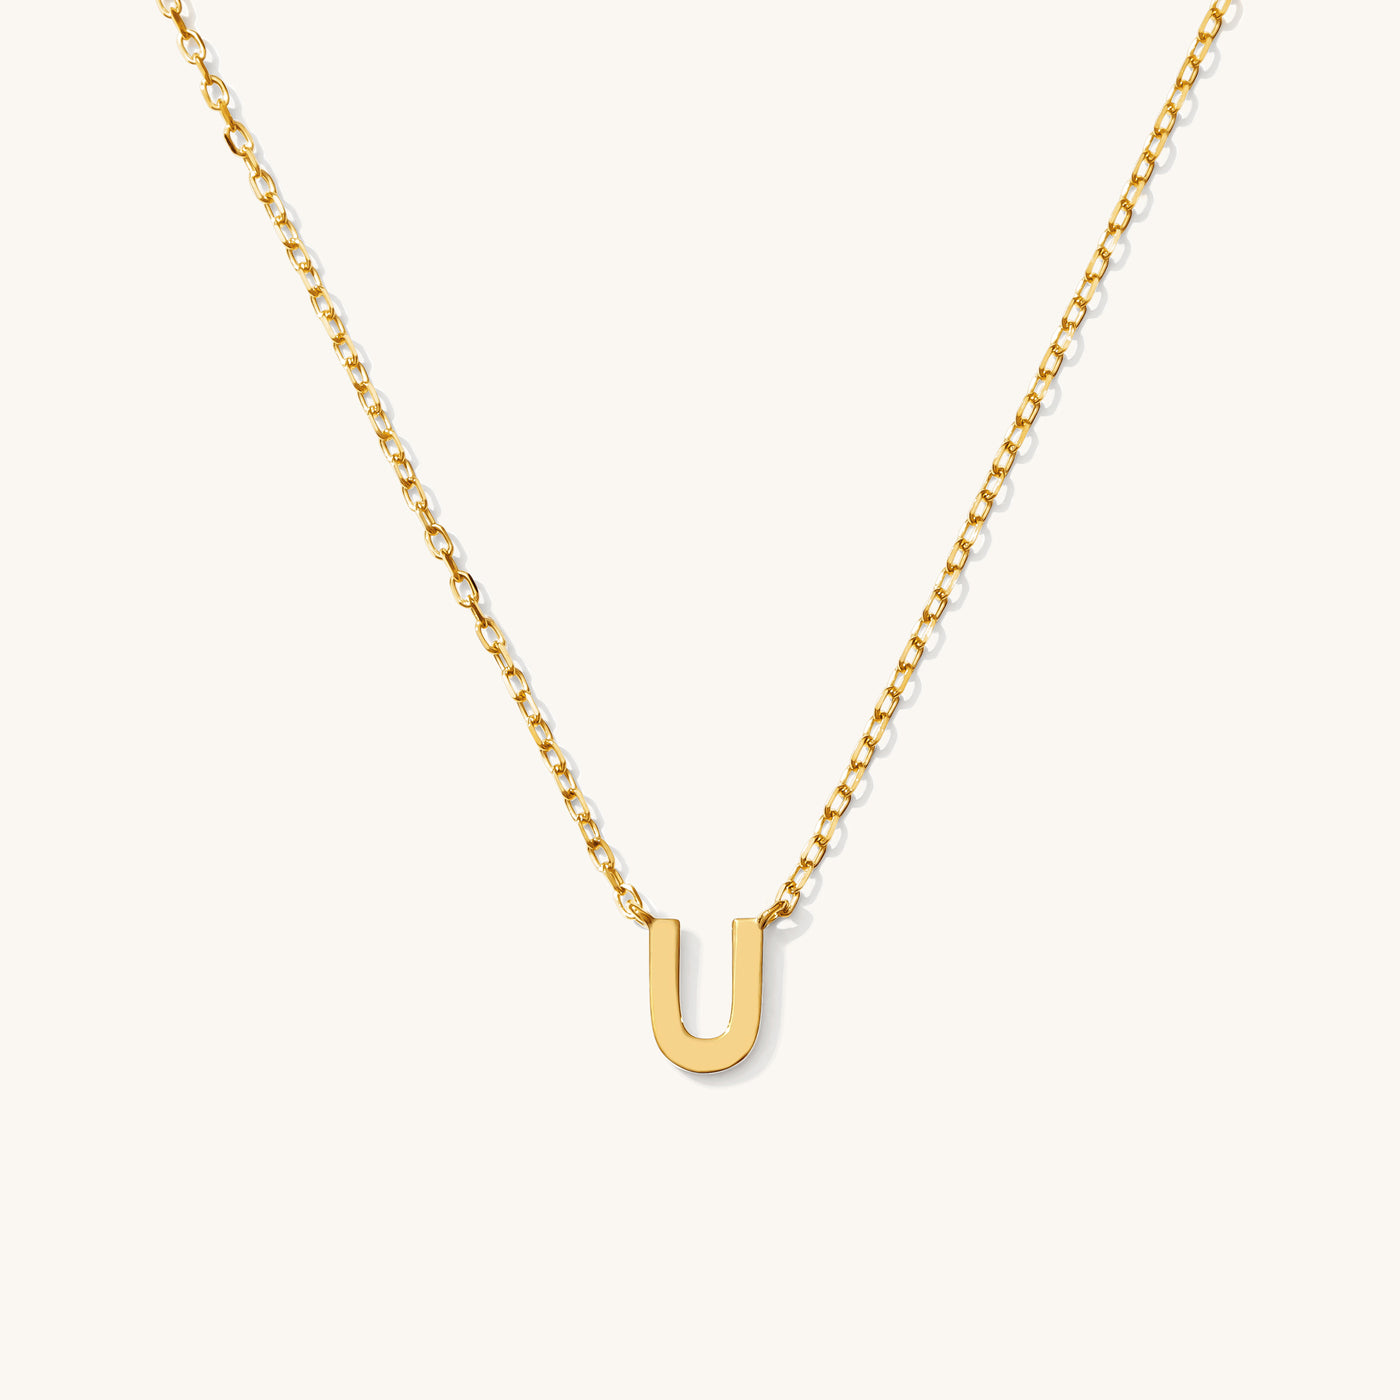 U Tiny Initial Necklace - 14k Solid Gold